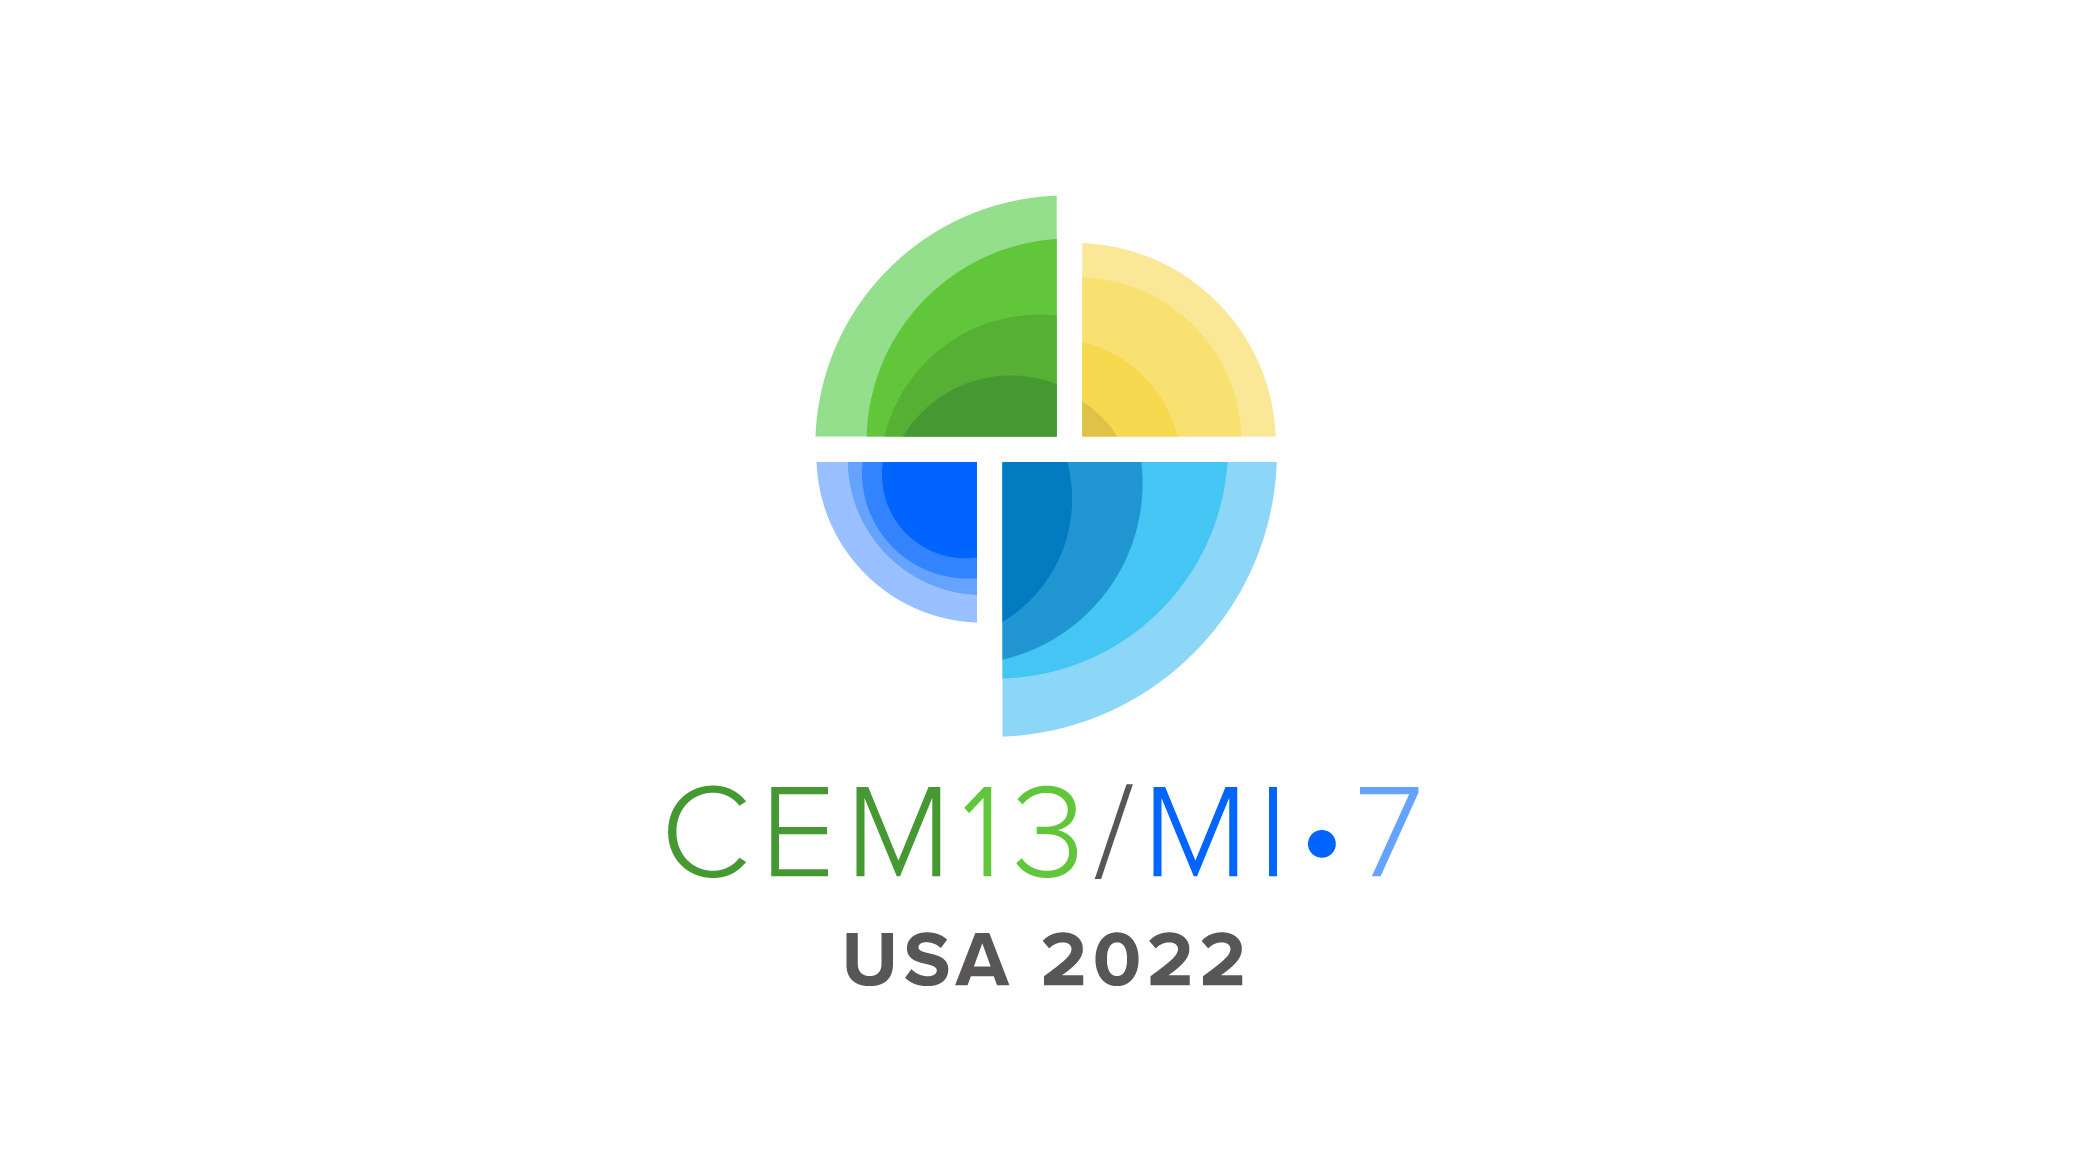 US Announces Date and Location of CEM13 and MI7! Clean Energy Ministerial